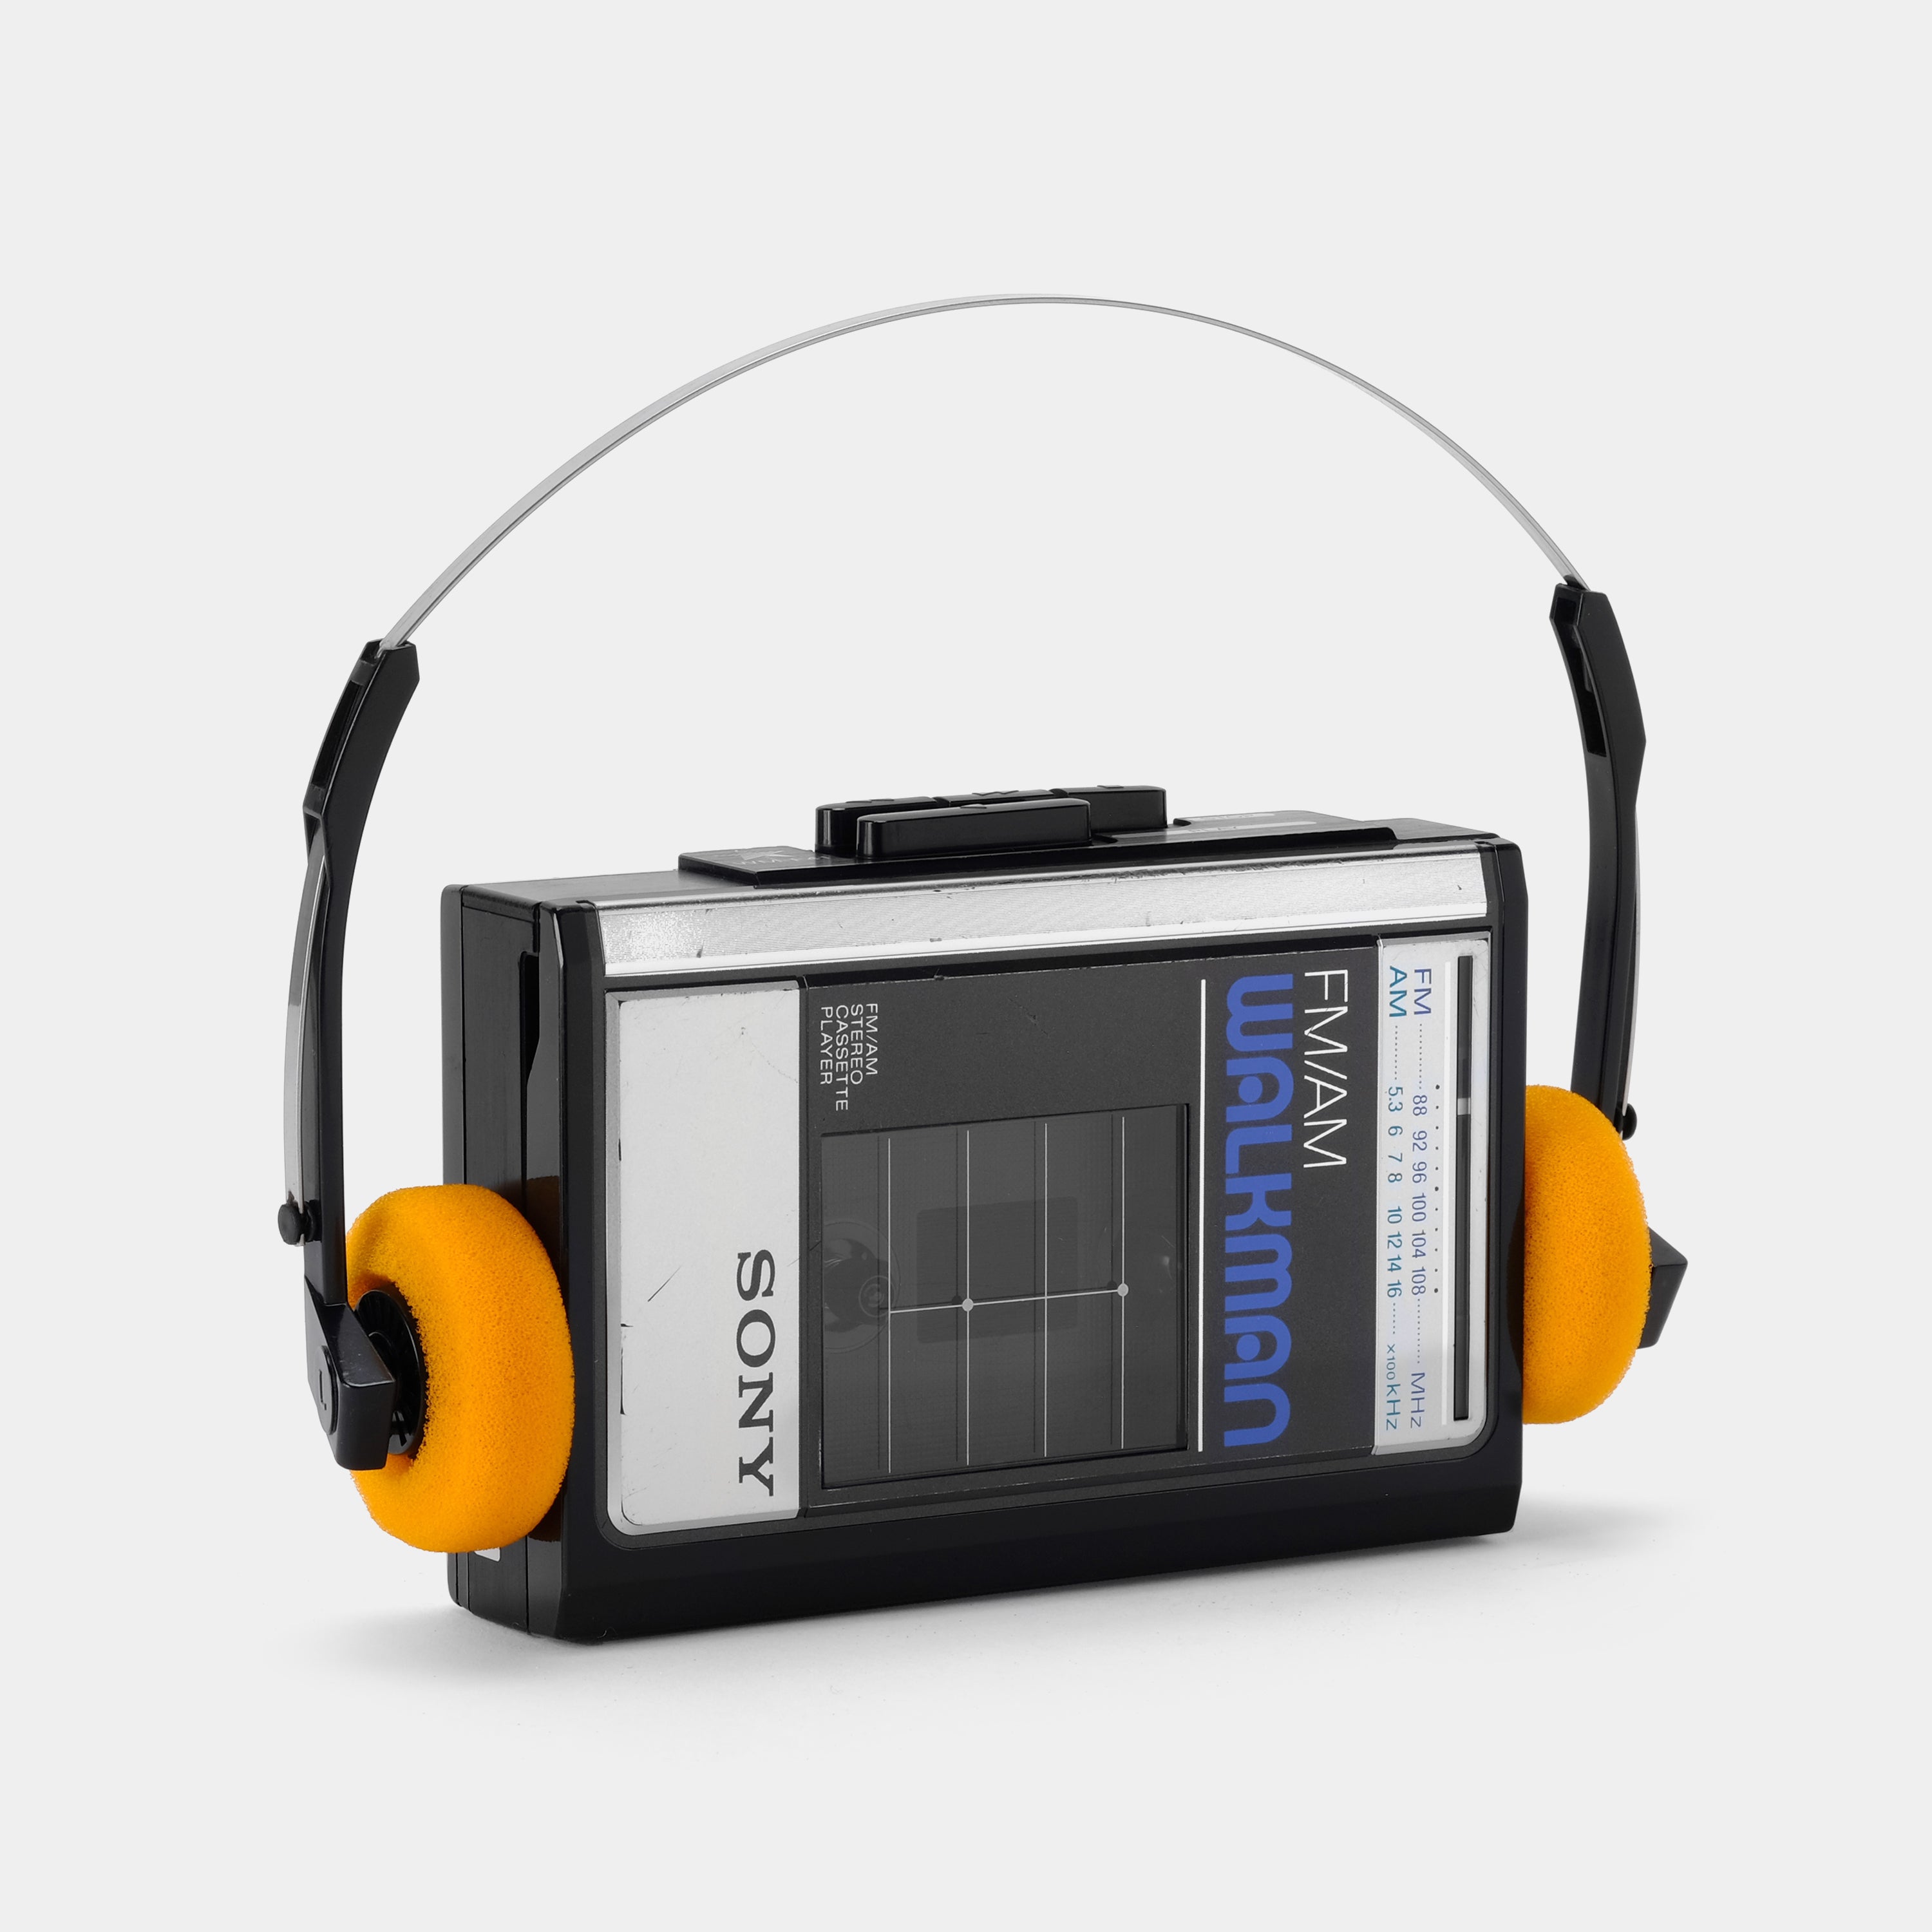 The history of the Walkman: 35 years of iconic music players - The